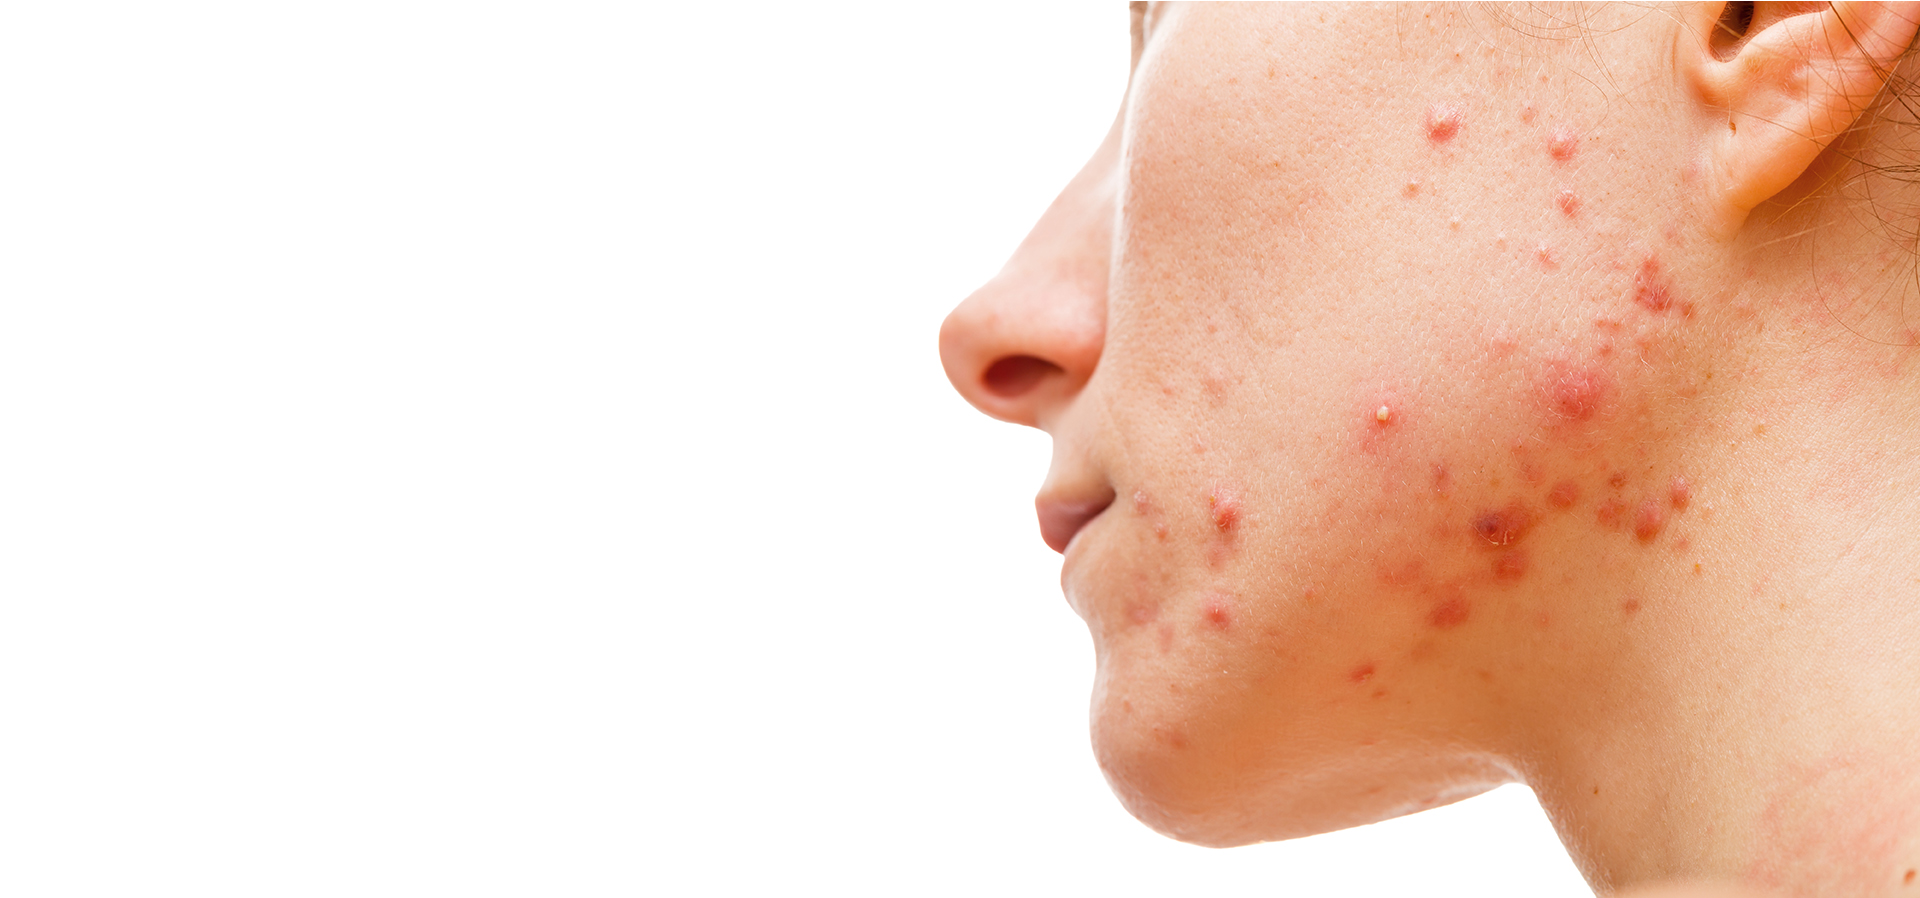 Woman's face with acne and acne scars